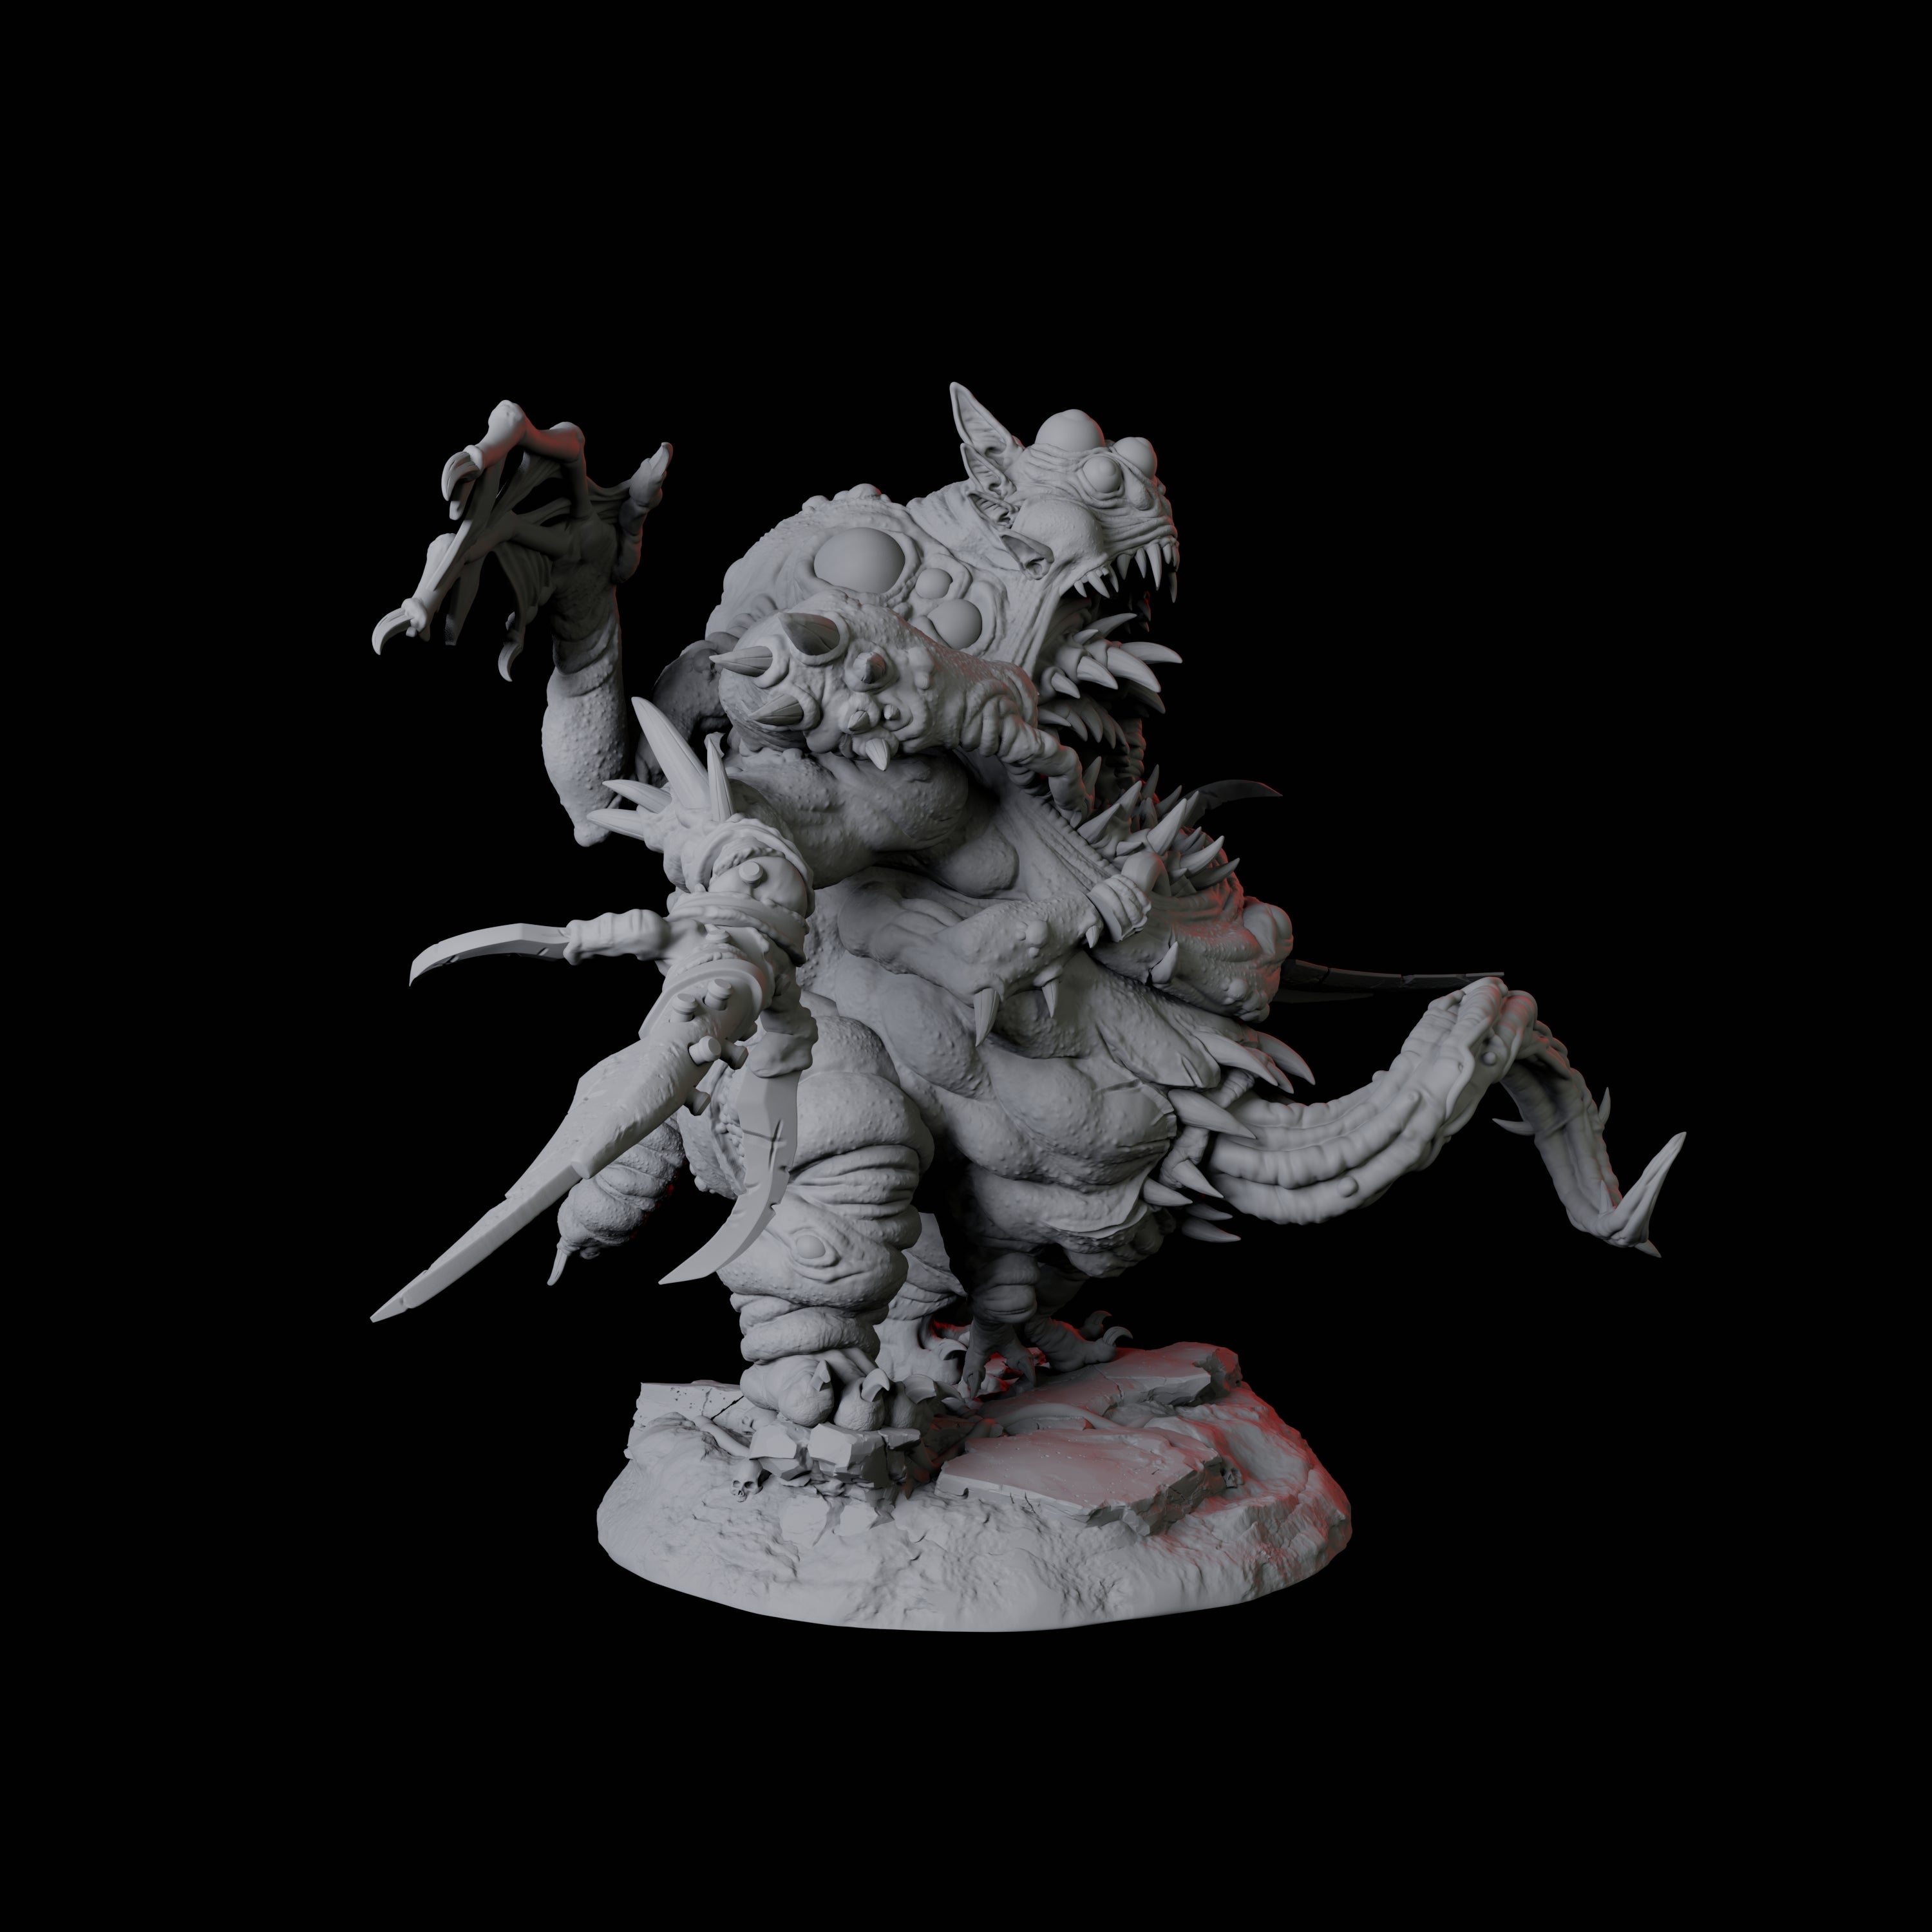 Fleshwarped Irnakurse C Miniature for Dungeons and Dragons, Pathfinder or other TTRPGs